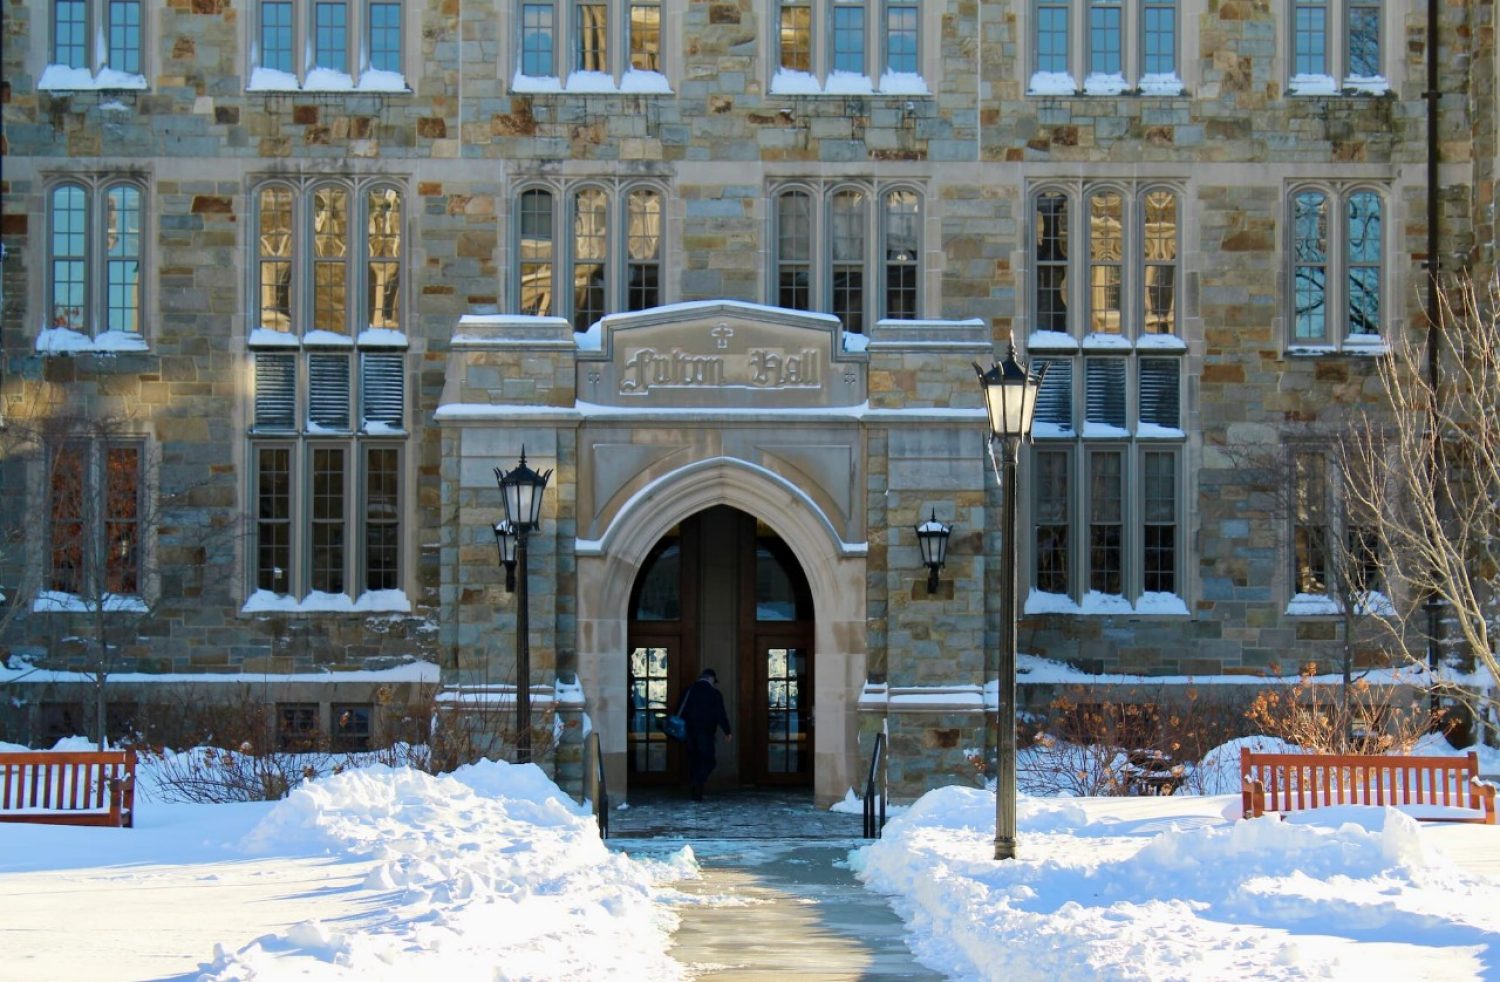 Fulton Hall entryway with snow on the ground